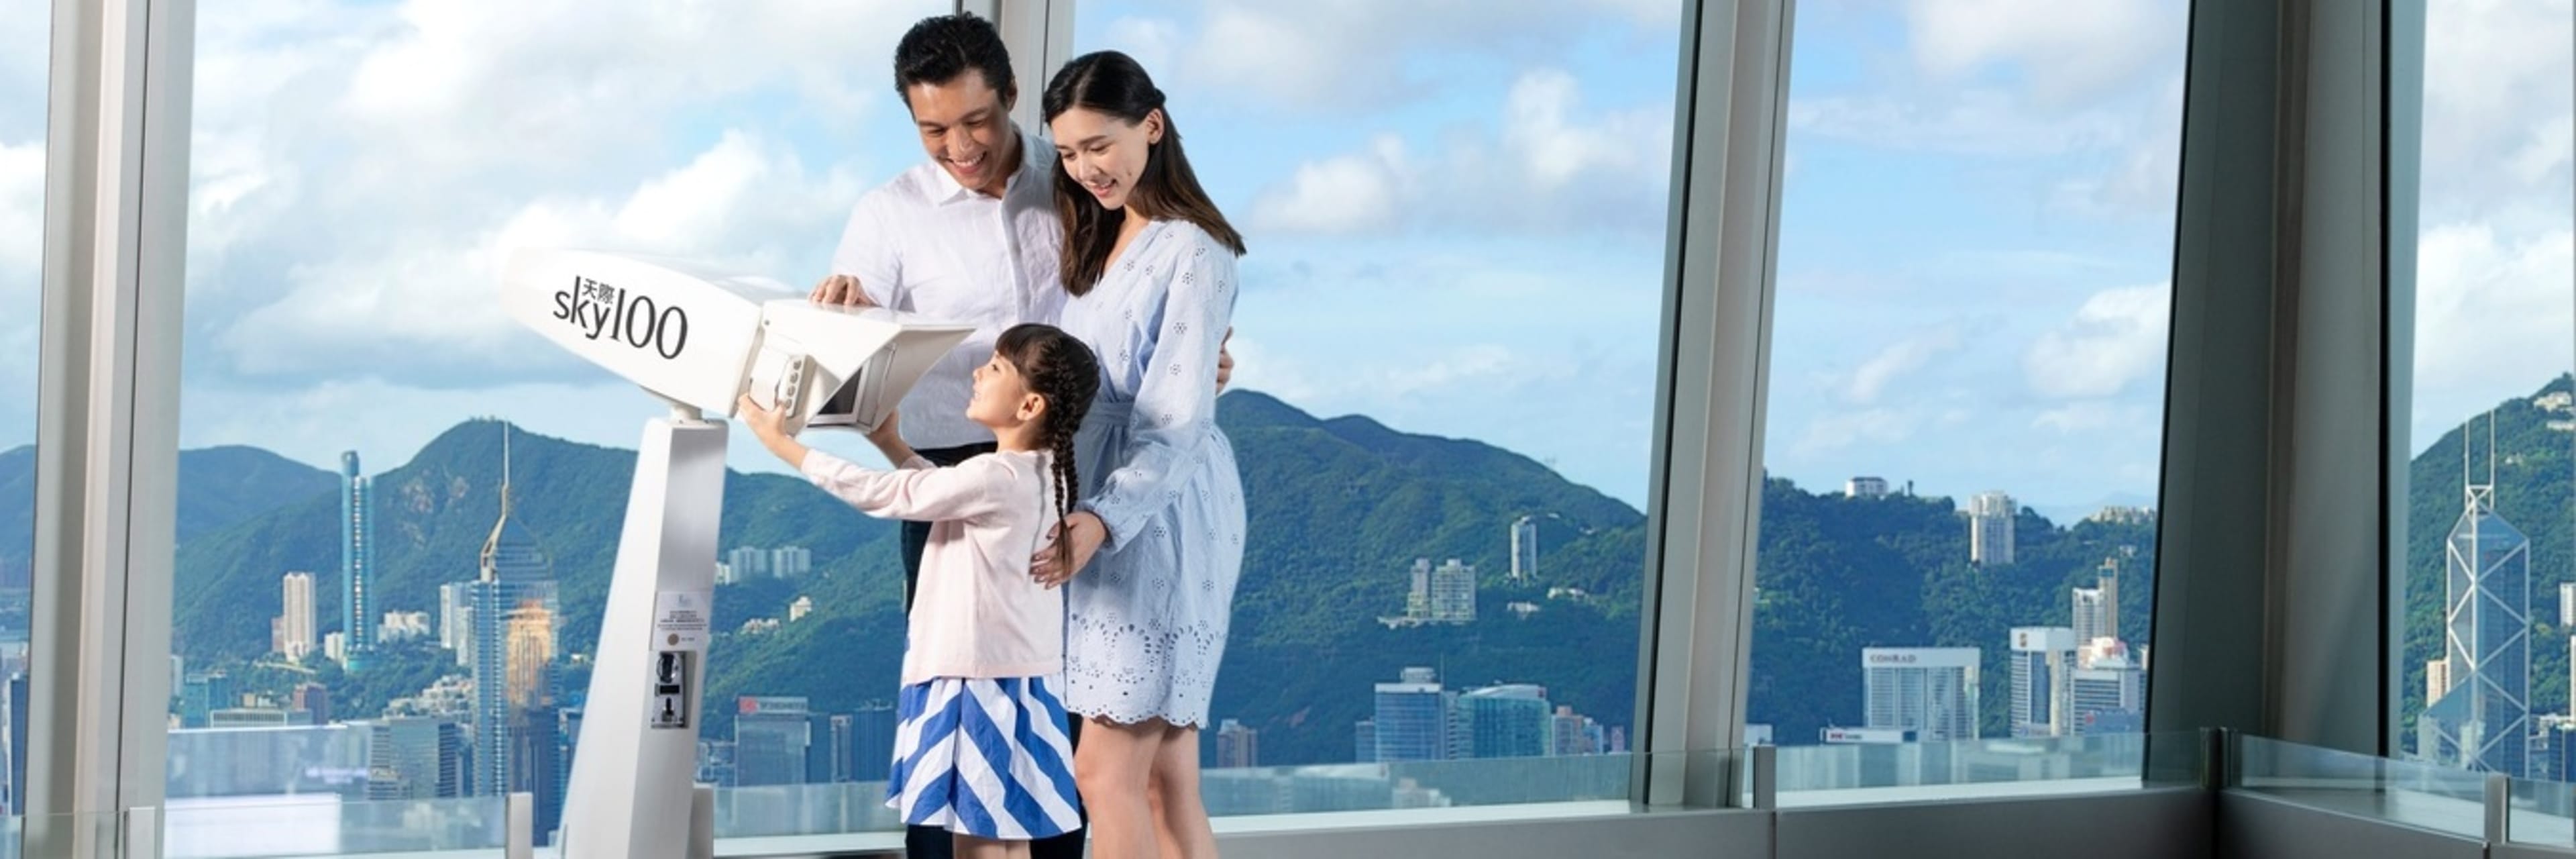 Family using a viewfinder at the Sky100 Hong Kong Observation Deck.